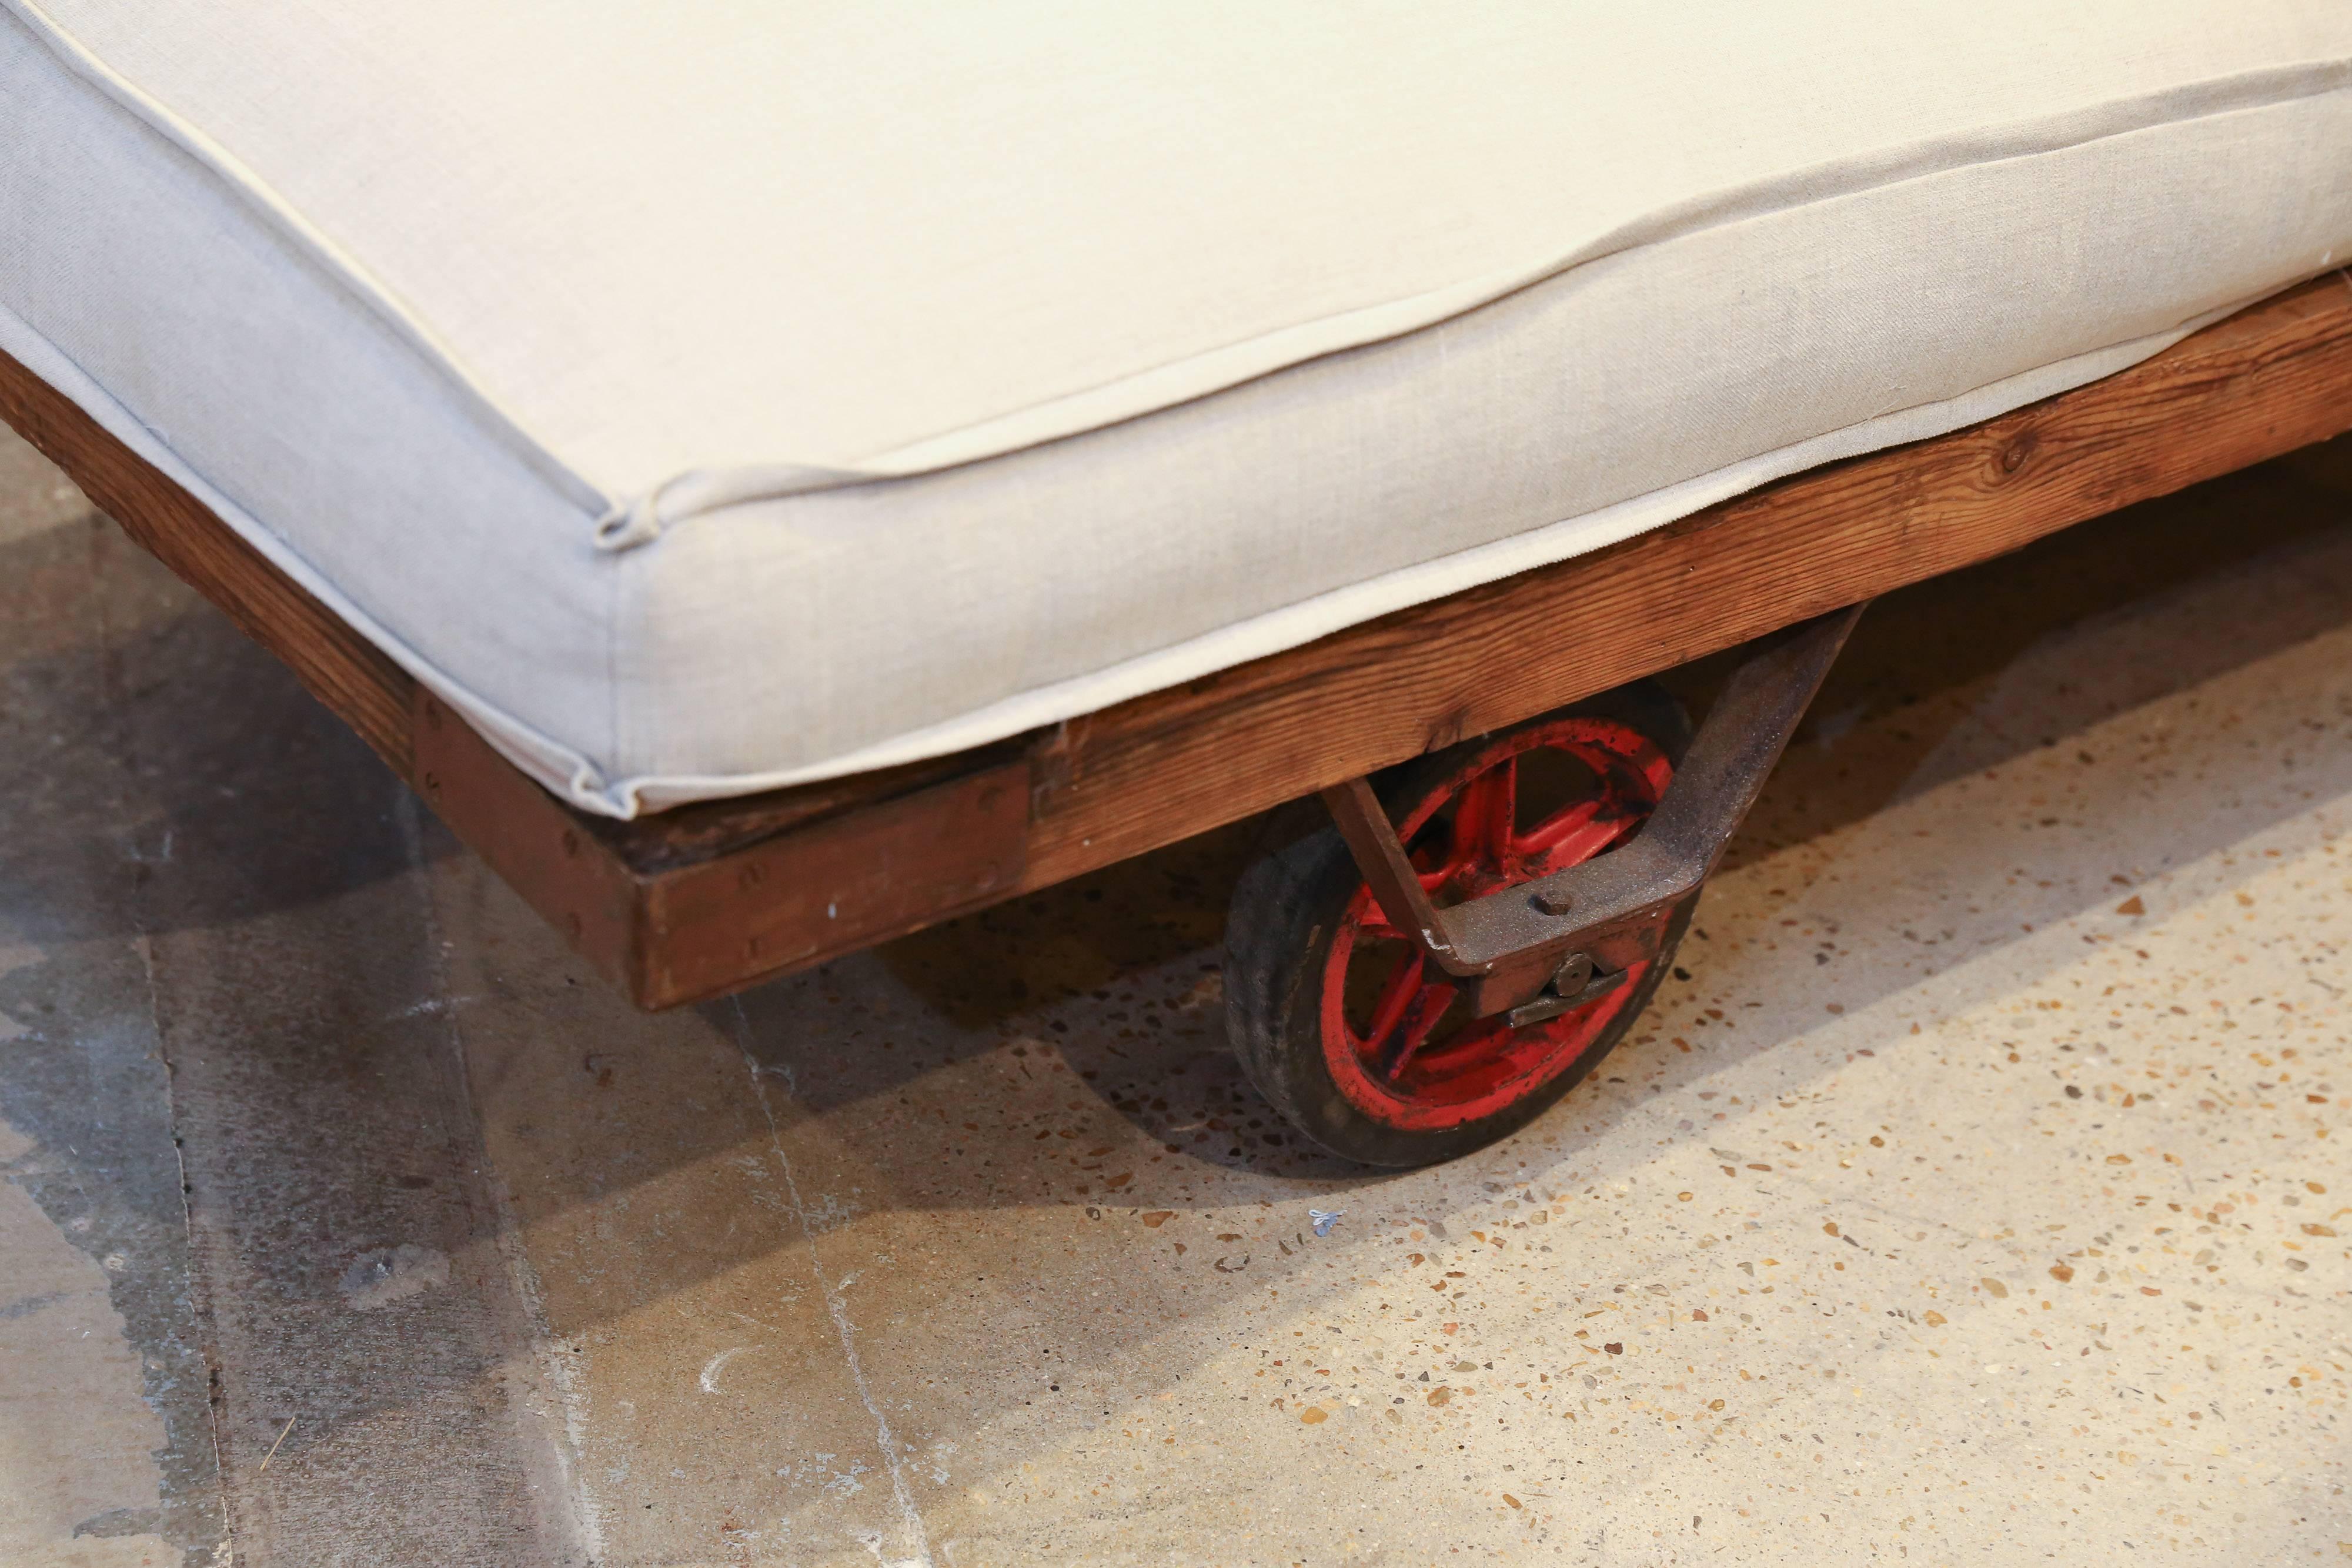 Piled with pillows this Industrial factory trolley becomes a chaise or a sofa but, when the pillows are removed, it instantly converts into a daybed. Three heavy duty wheels with original red paint support the heavy wooden frame with iron corner